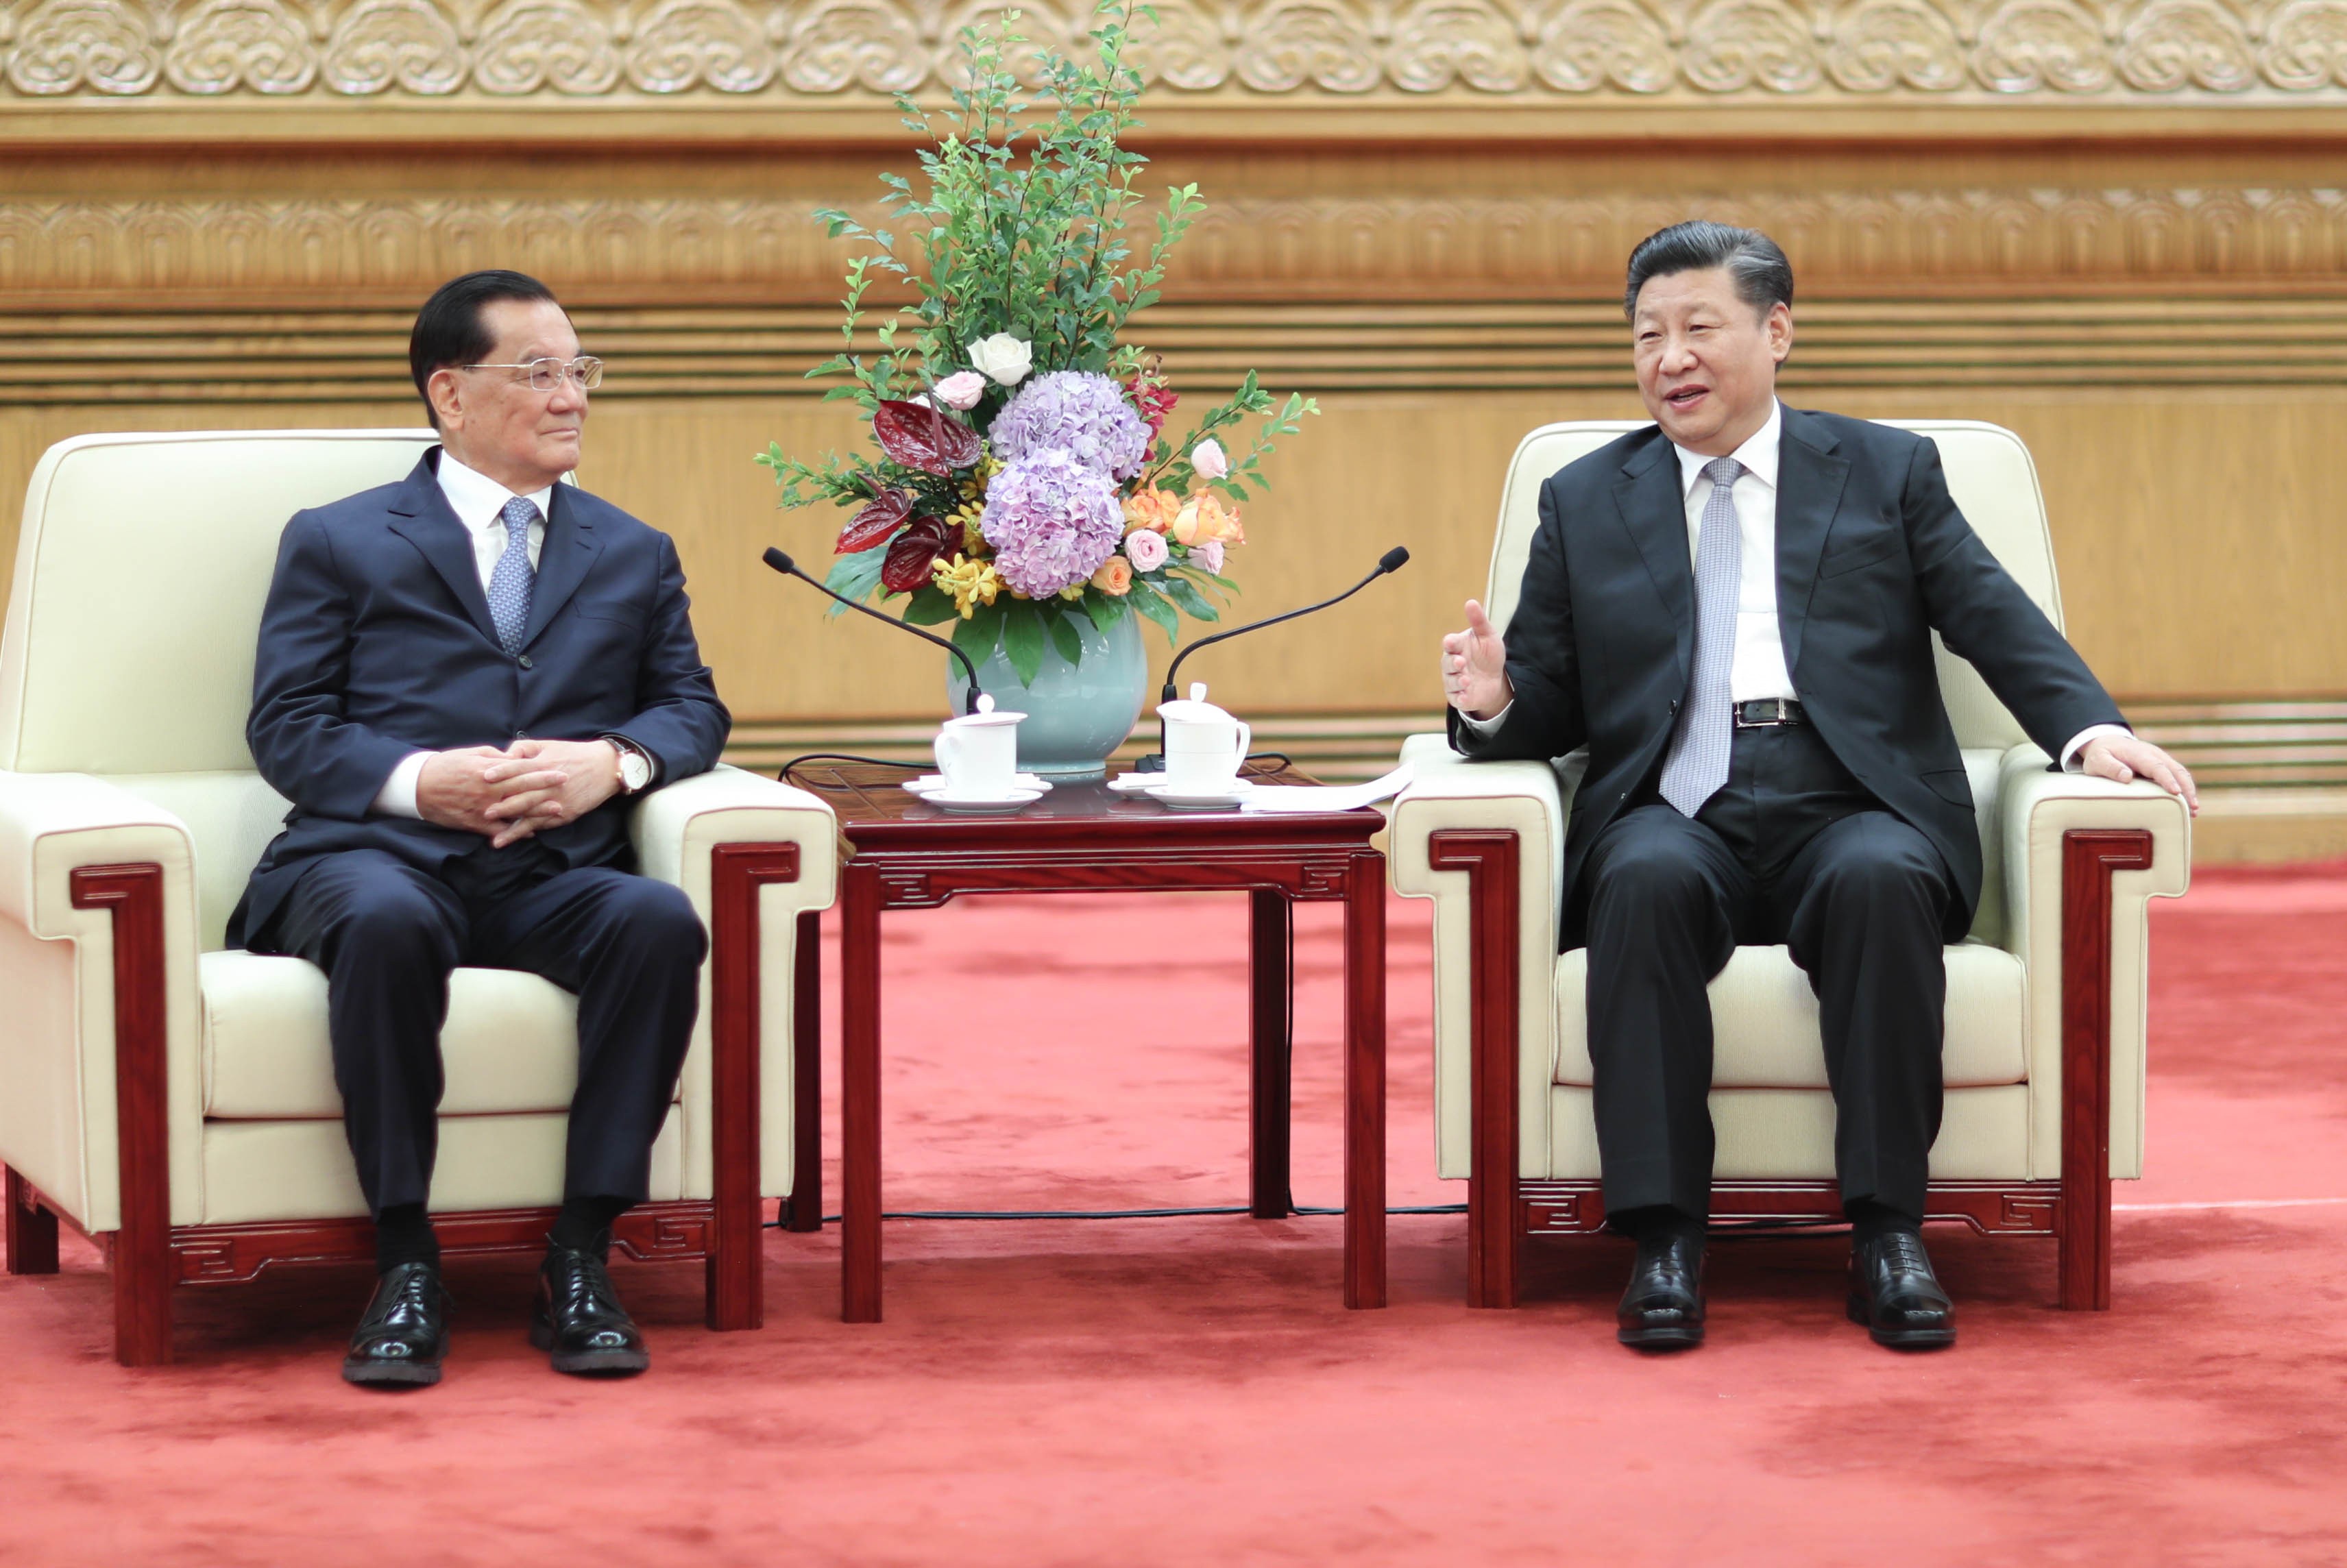 Chinese President Xi Jinping (right) meets Lien Chan (right), former vice-president of Taiwan and former chairman of the Kuomintang party, at the Great Hall of the People in Beijing on July 13. Photo: Xinhua